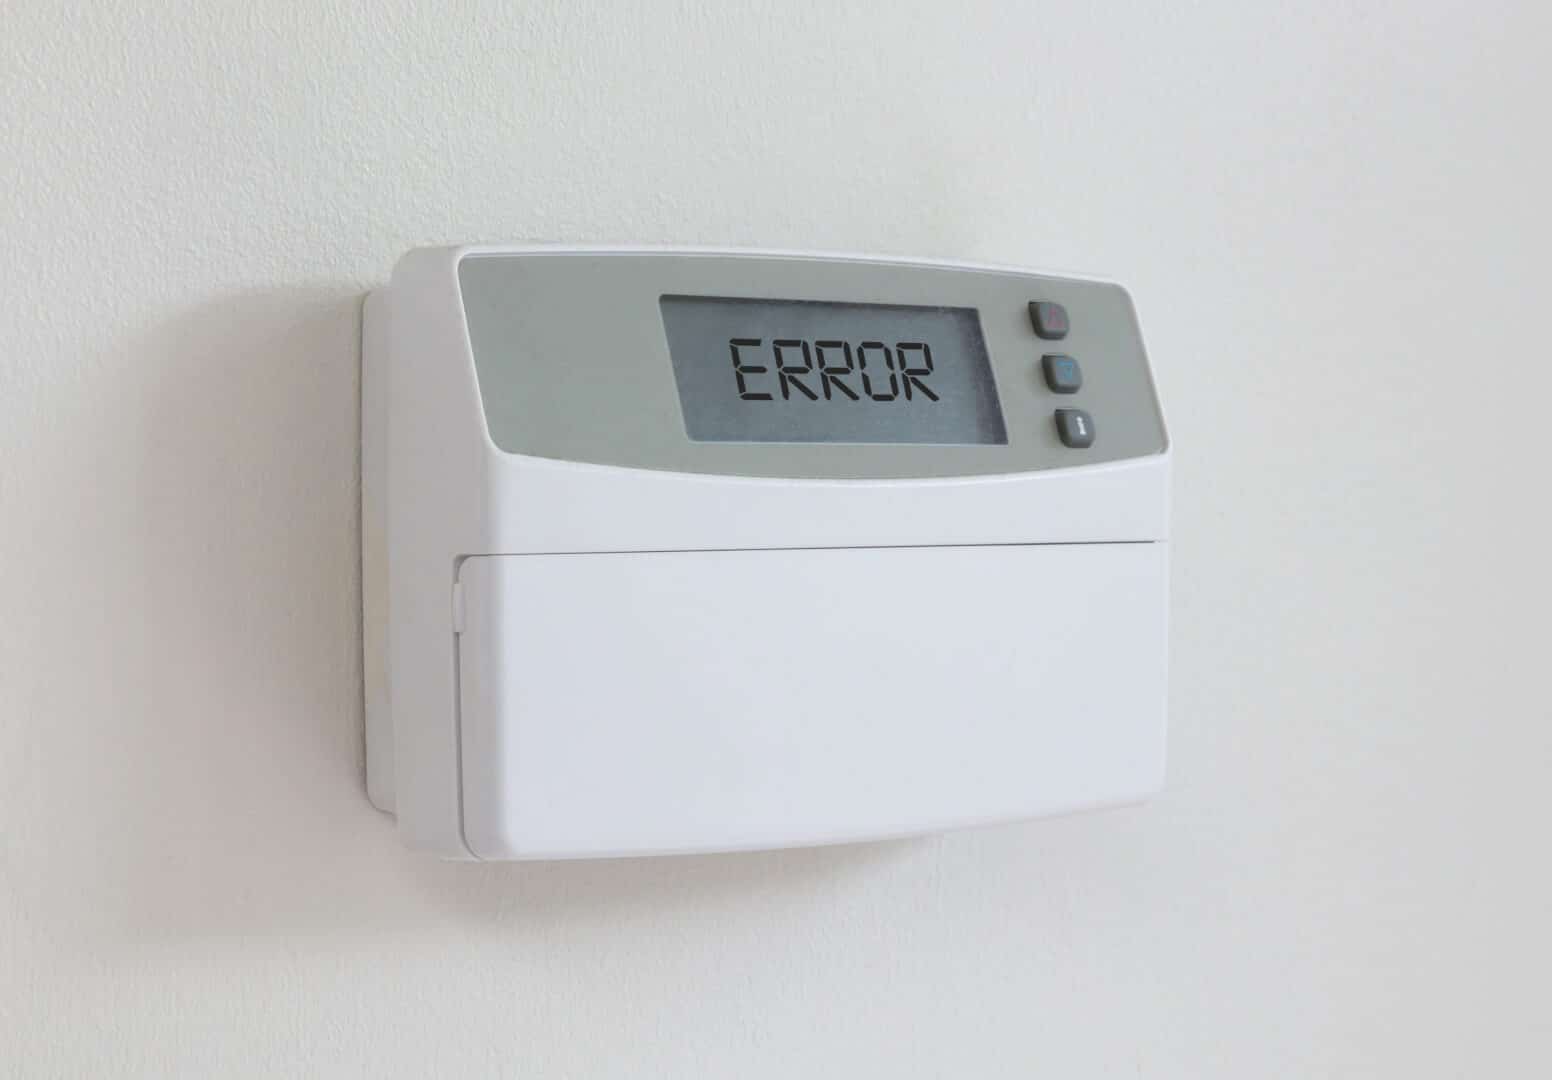 A thermostat indicating an error